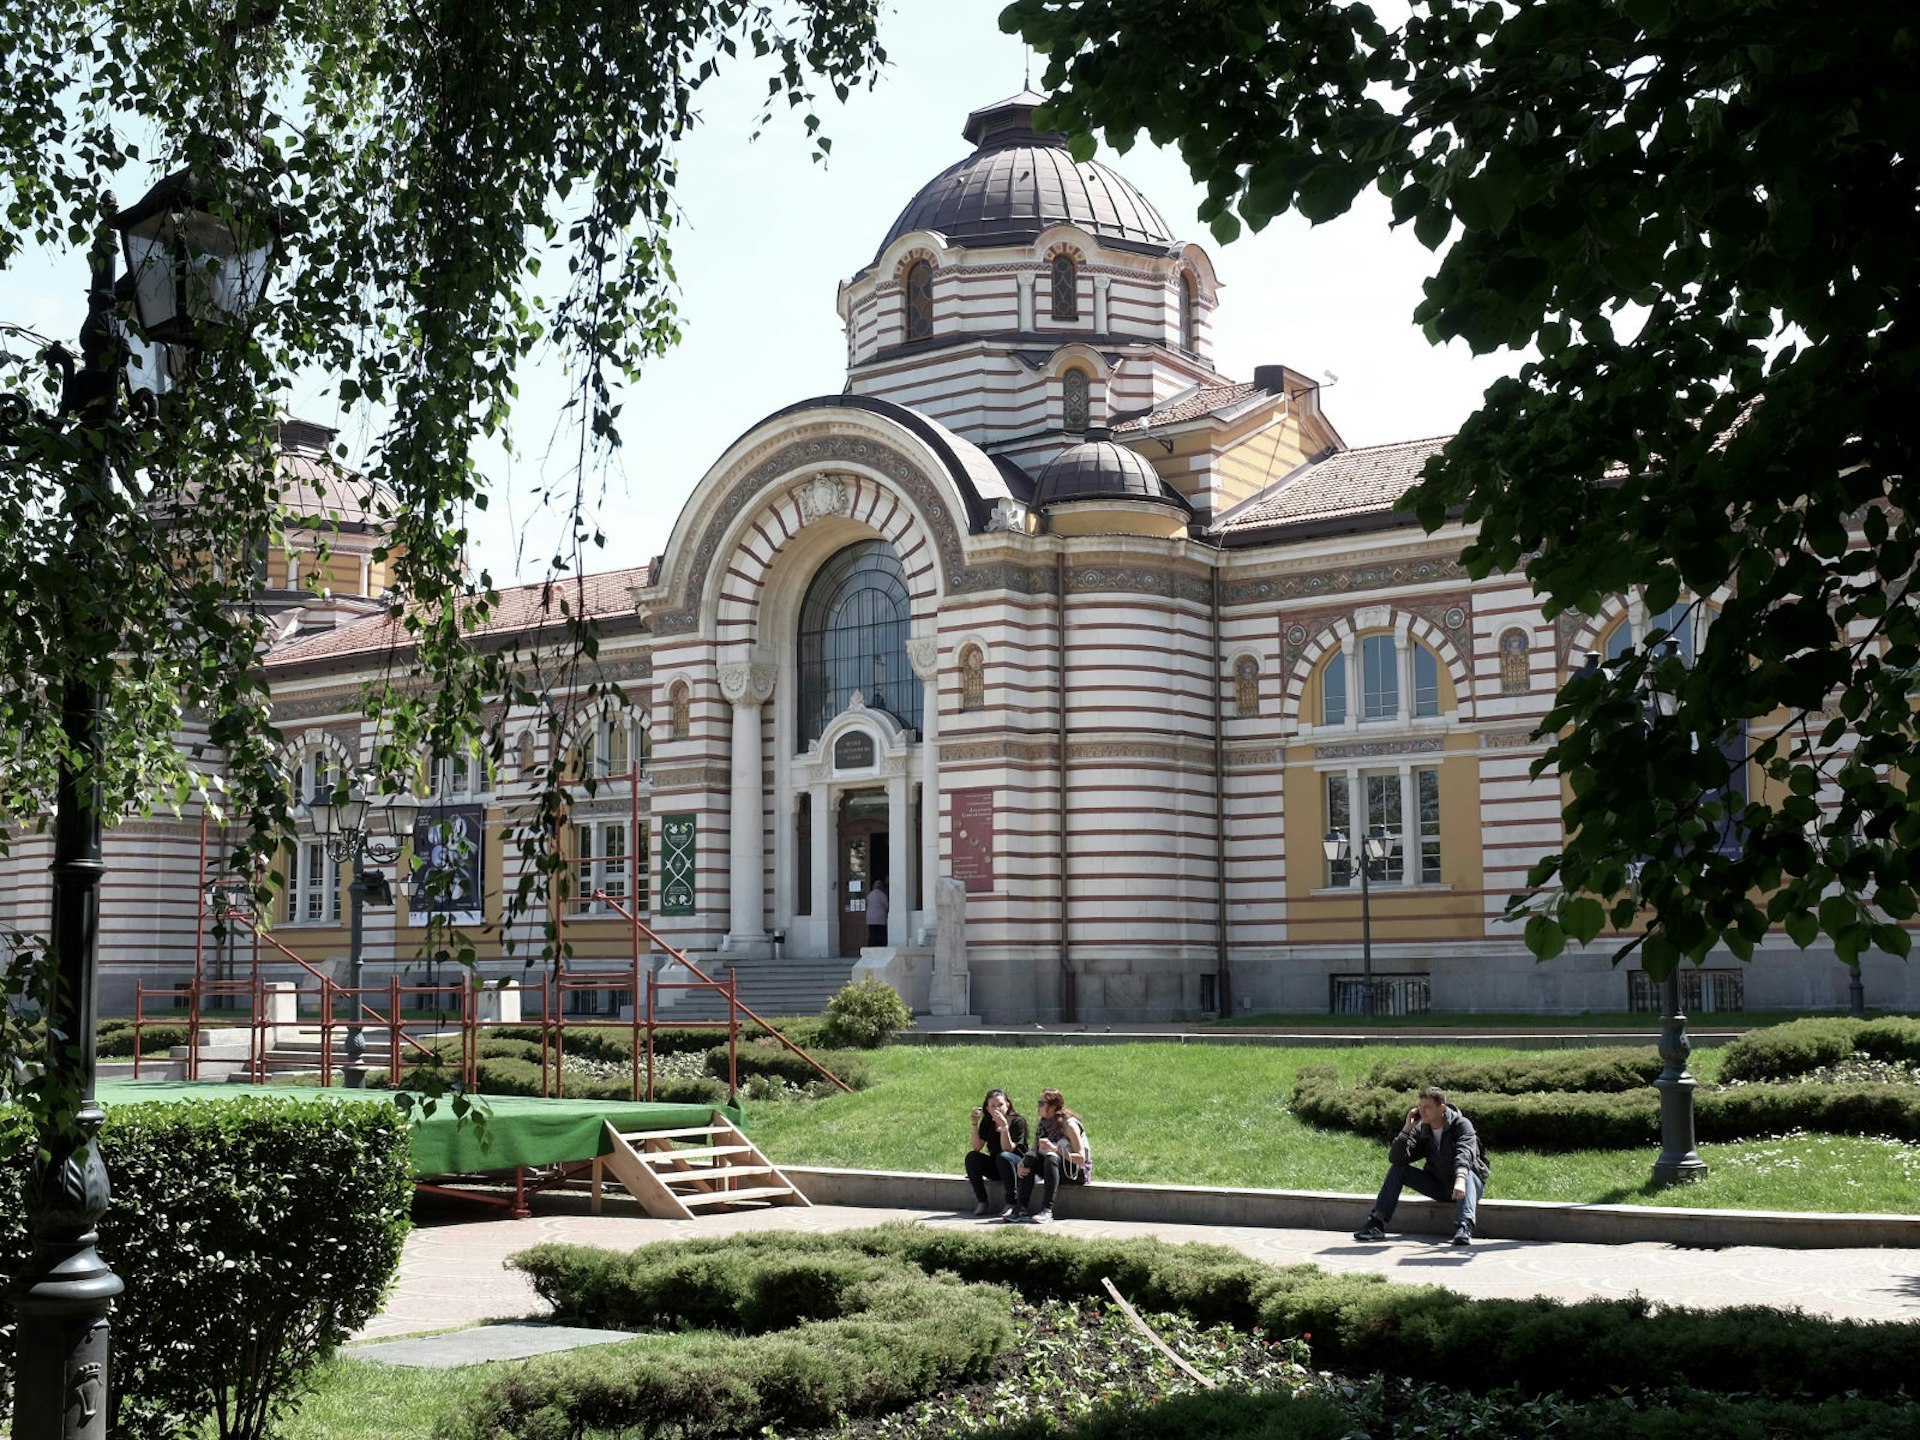 Sofia History Museum in the former Mineral Baths building © Mark Baker / Lonely Planet